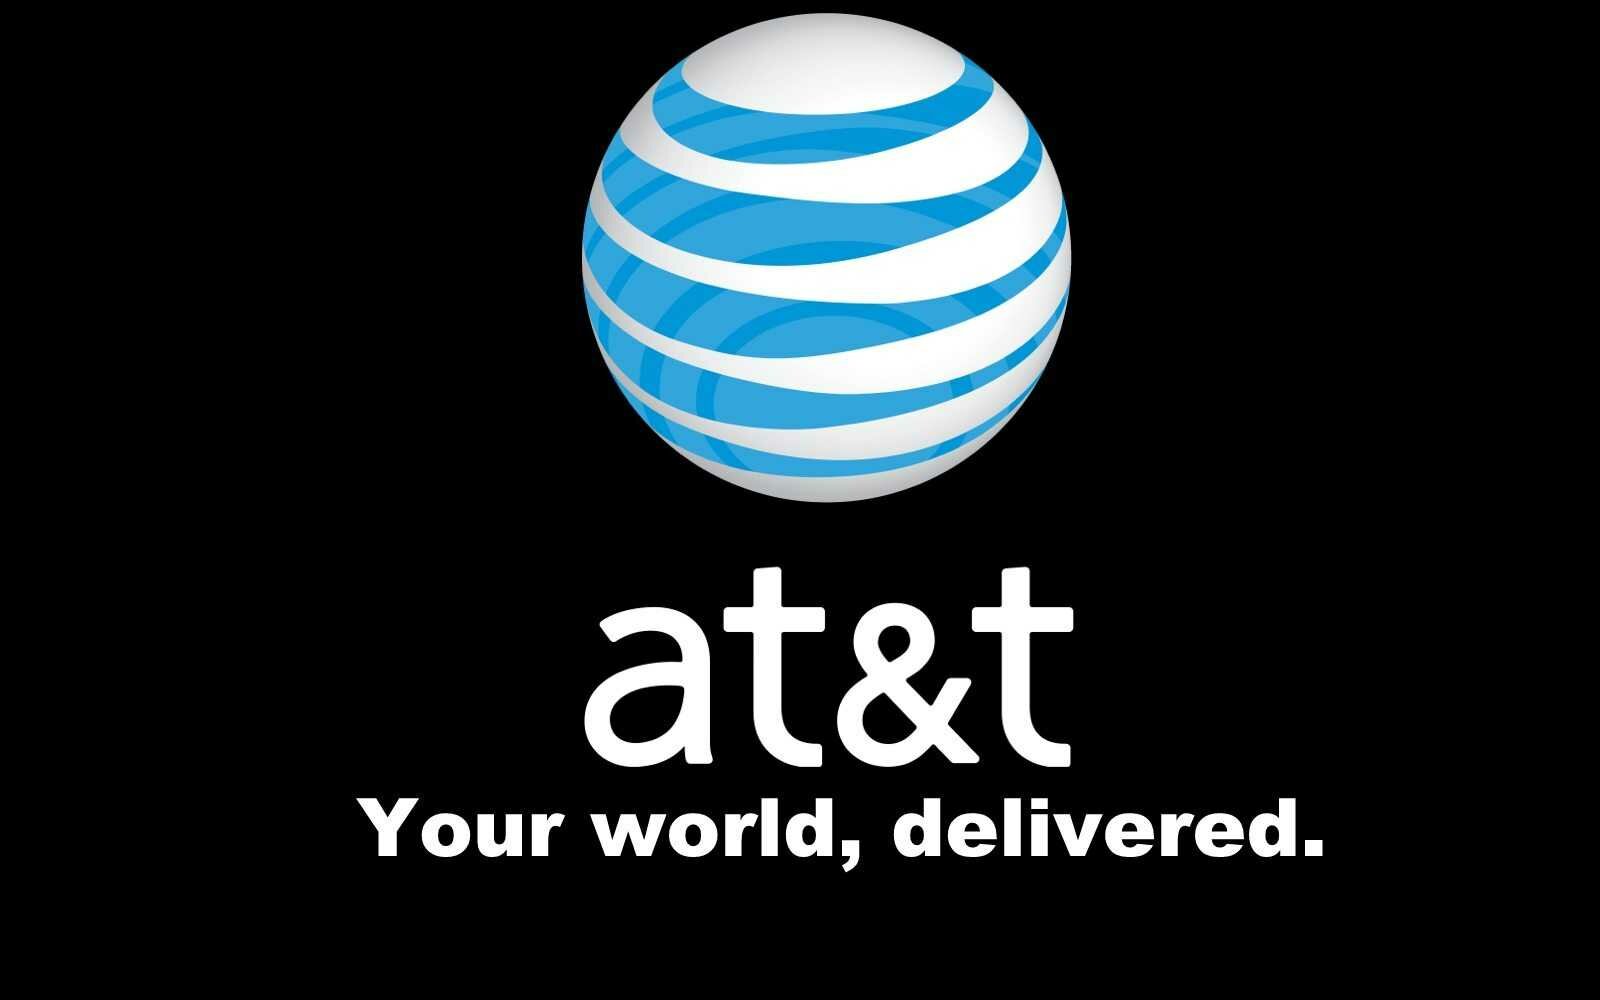 AT&T is investing as much as 450 Million U dollars in 3 years boosting the local network